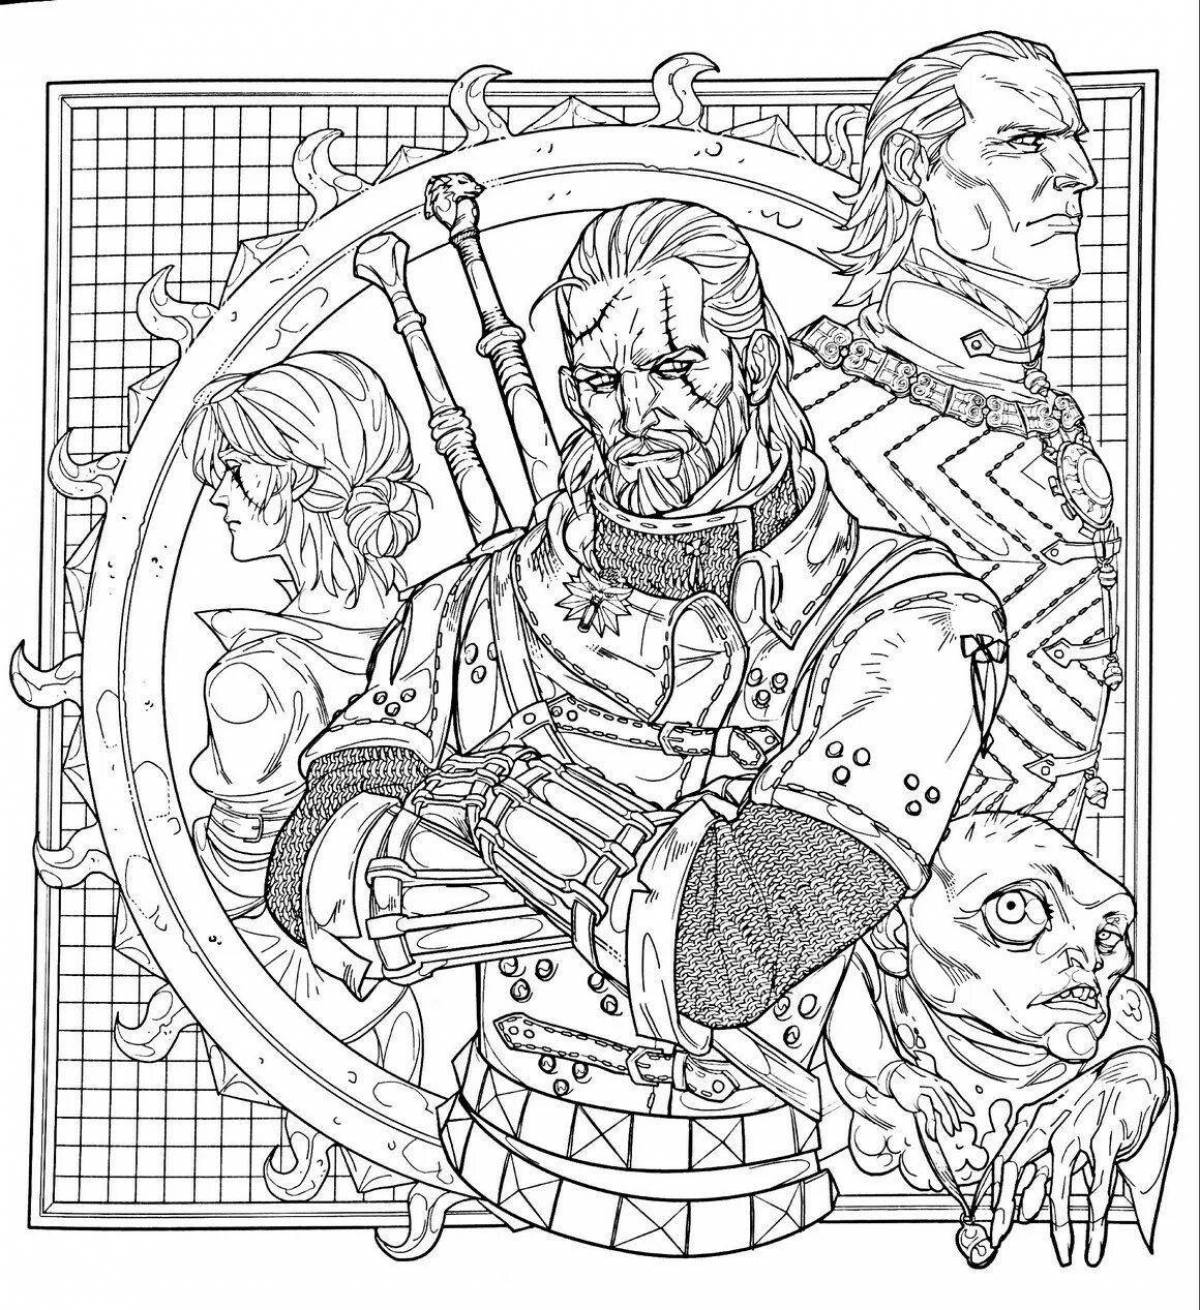 Charming witcher 3 coloring book